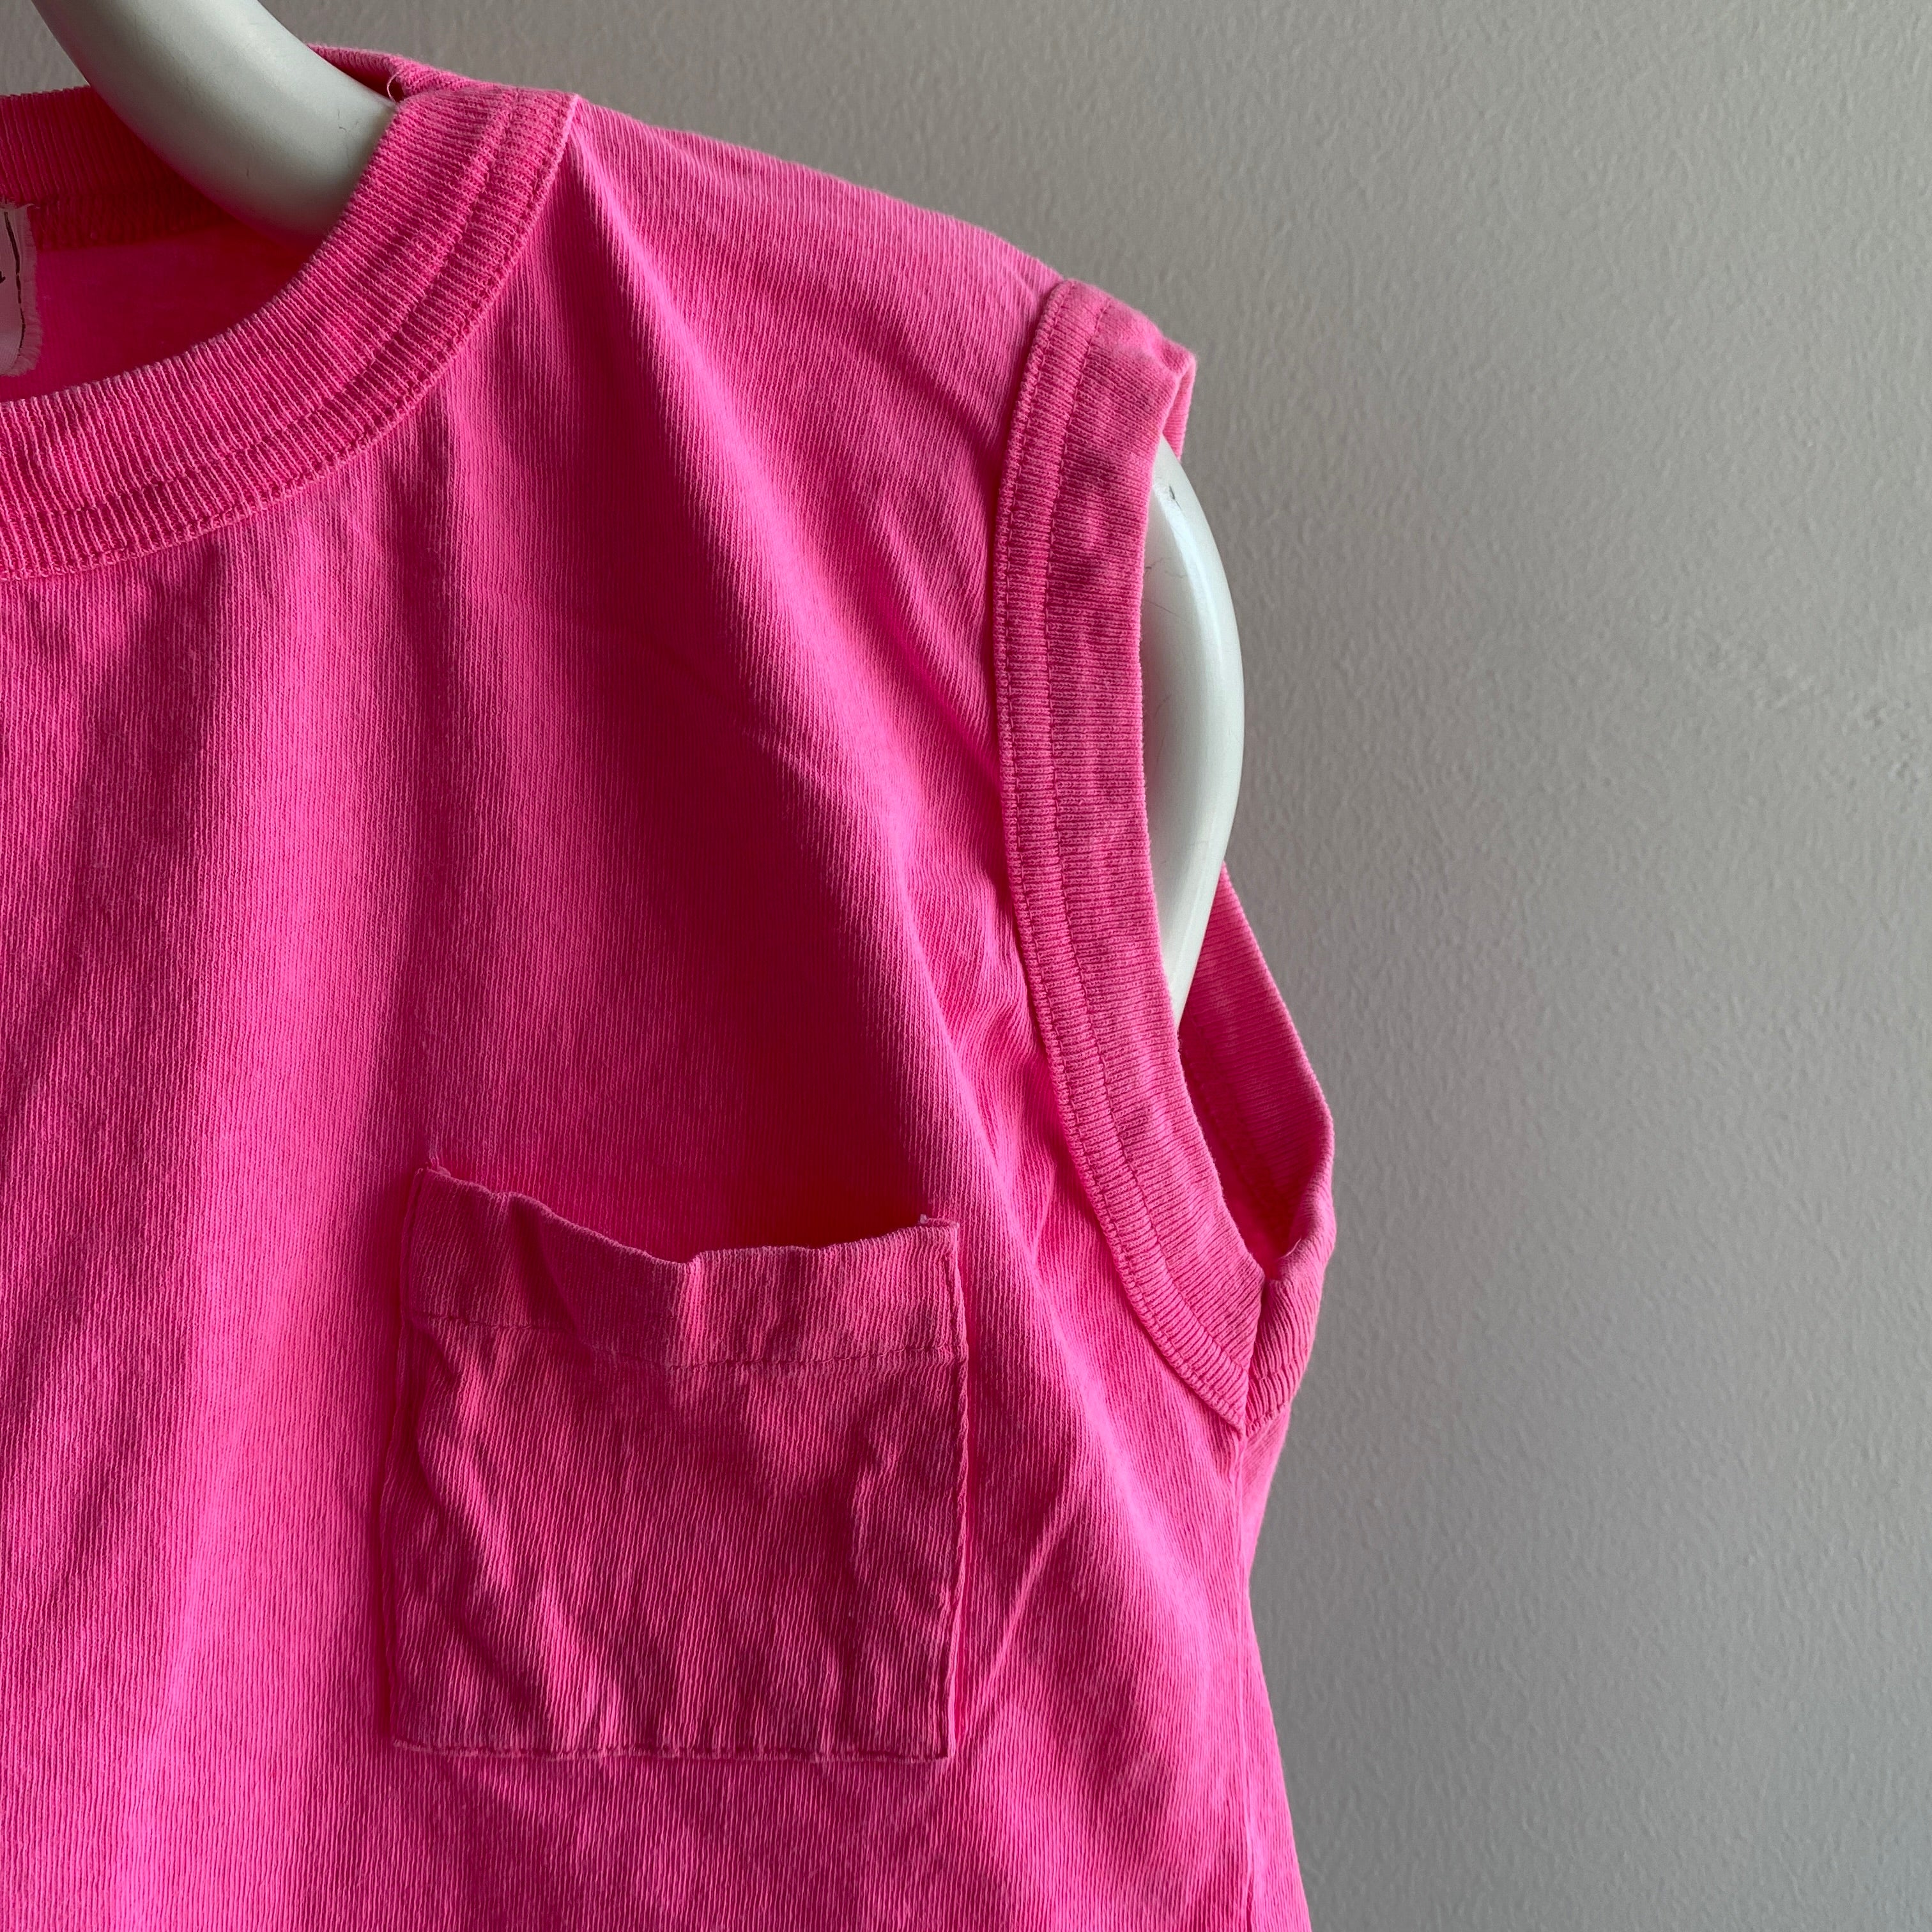 1980s HOT HOT Pink Cotton Crop Top - Oh My!